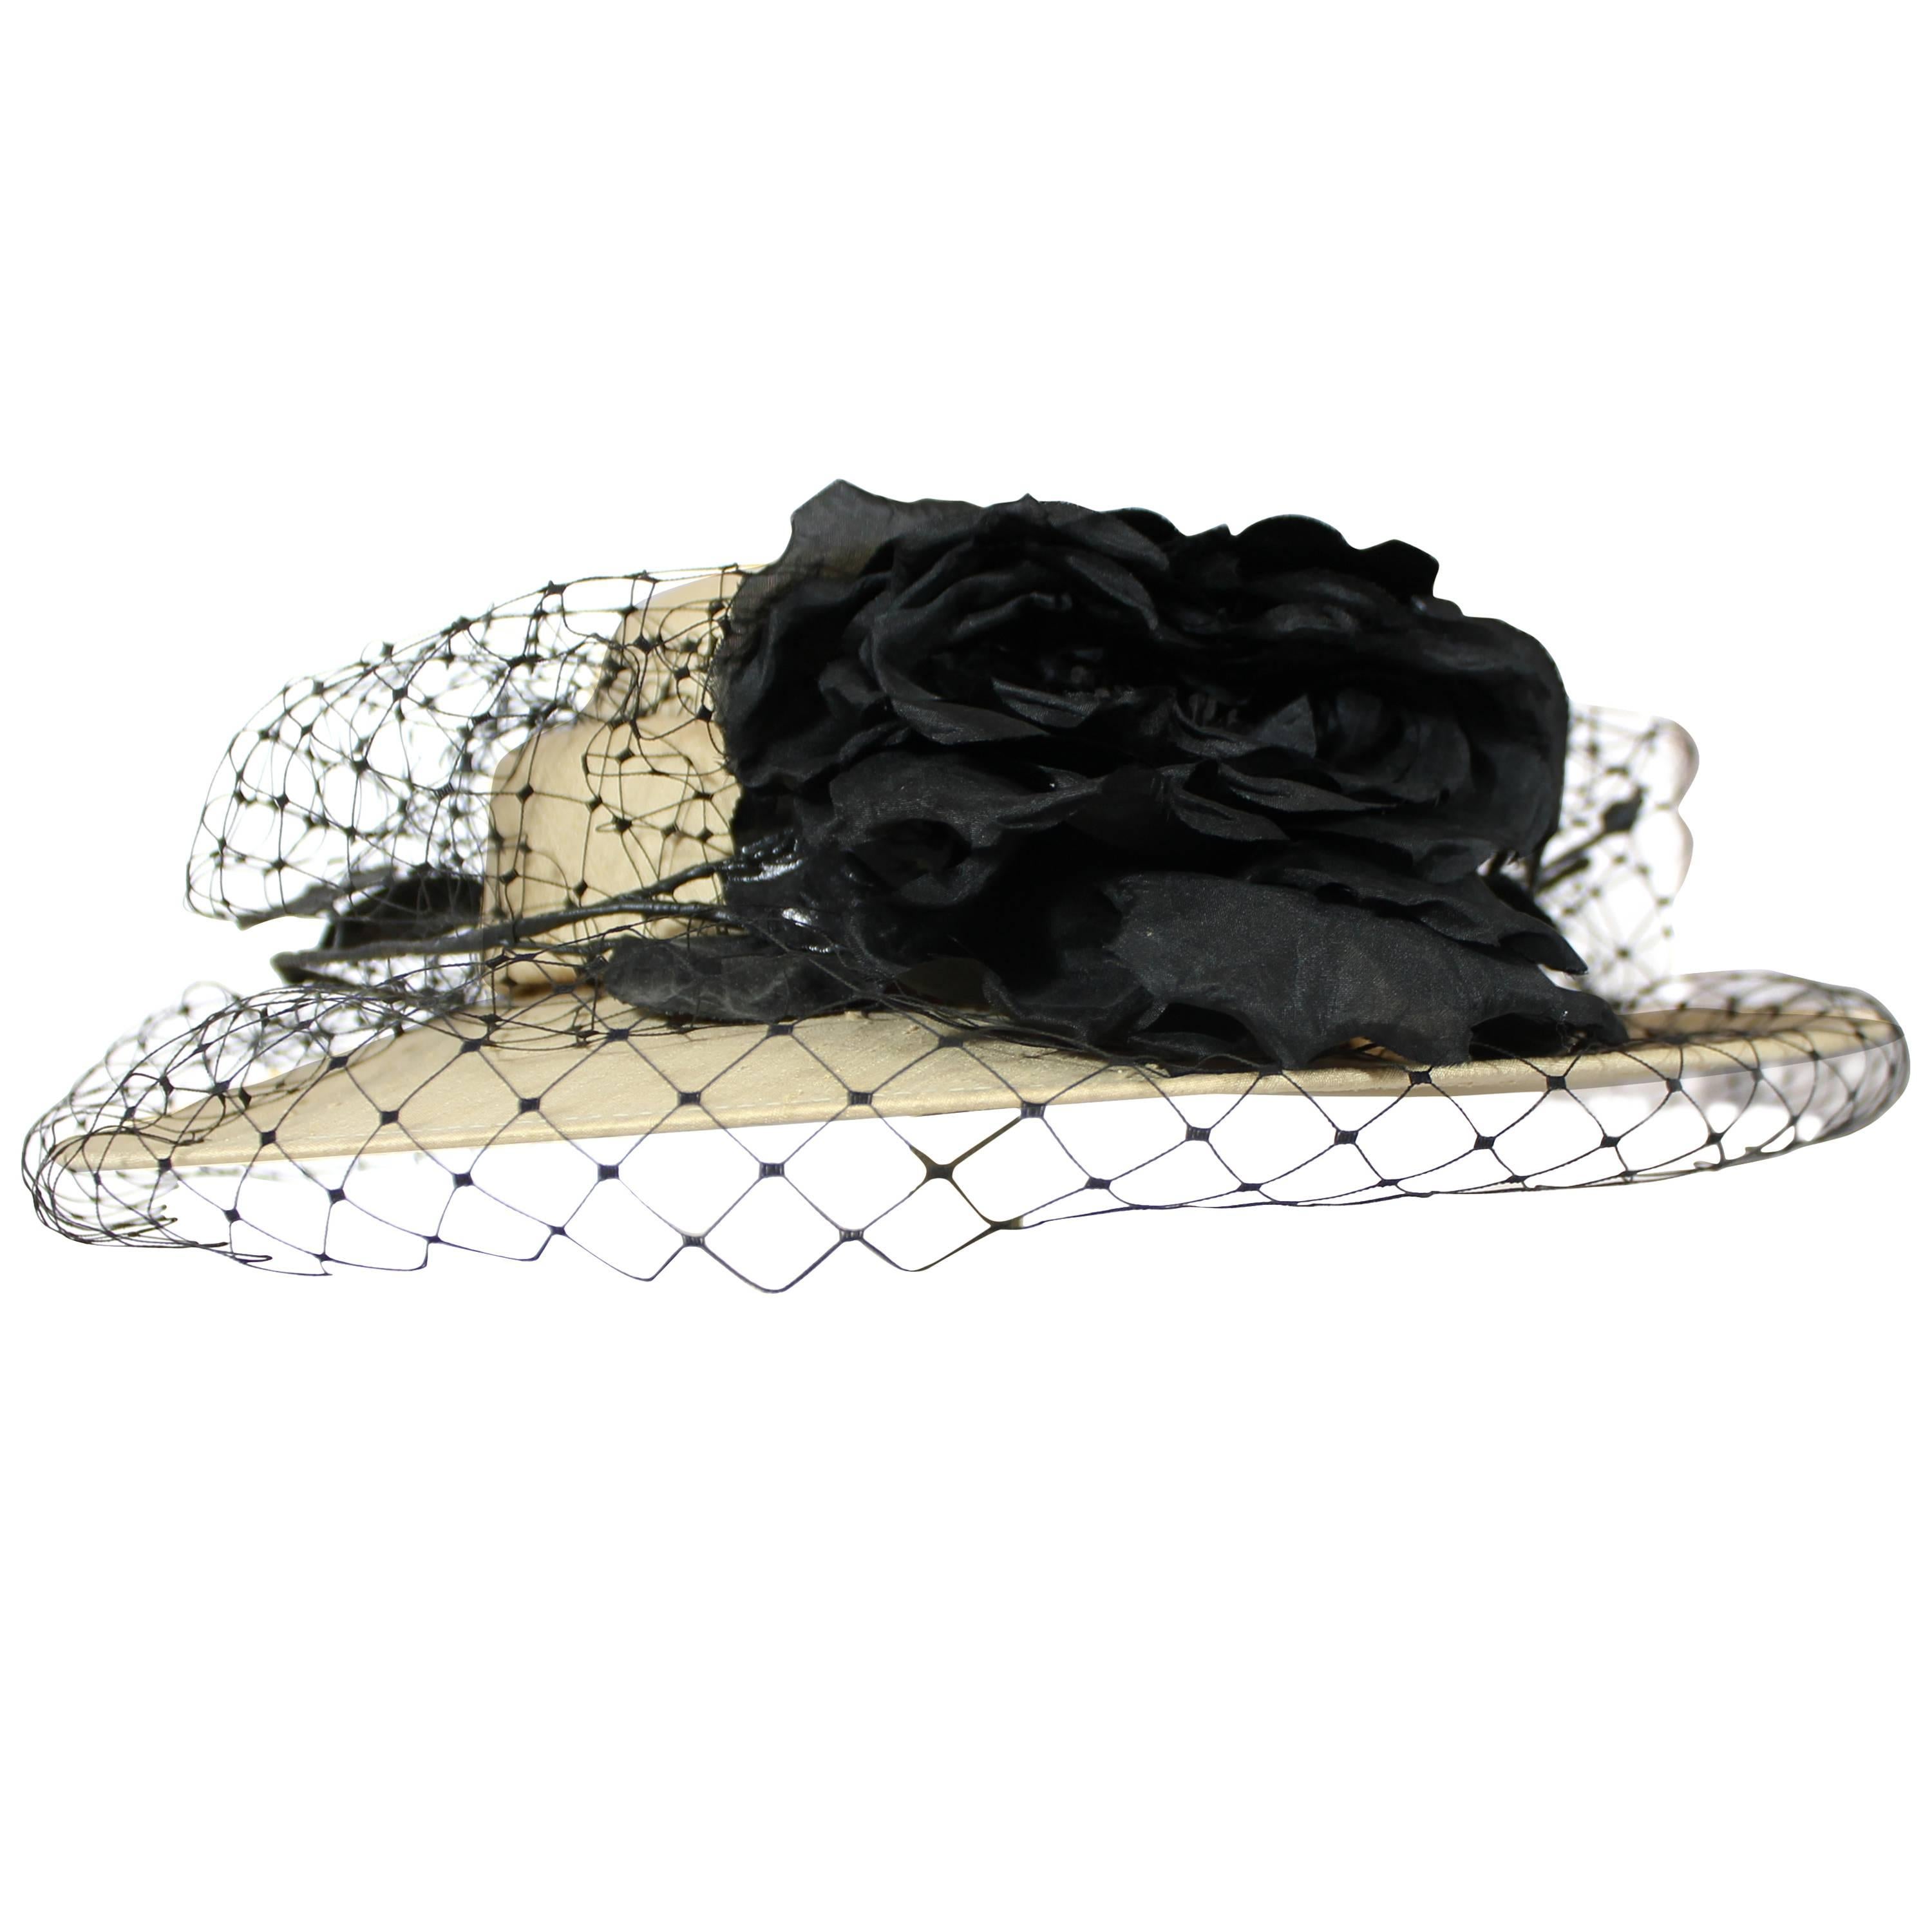 Suzanne Couture Millinery Beige Raw Silk Hat with Black Netting and Flower